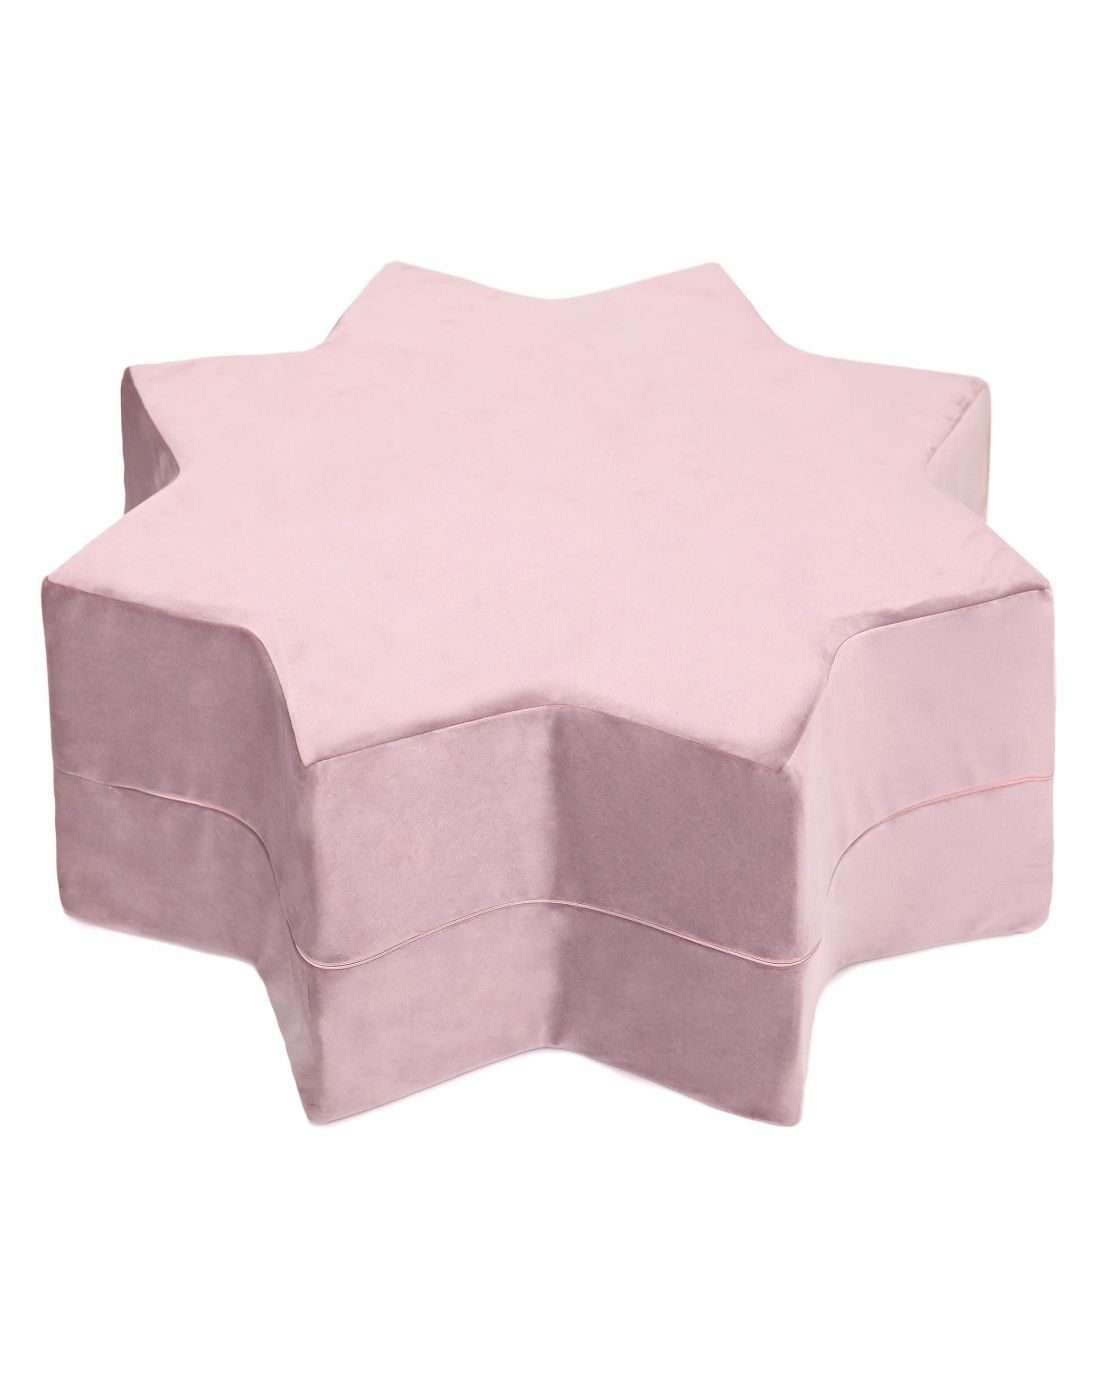 Misioo Pouf Star Pink